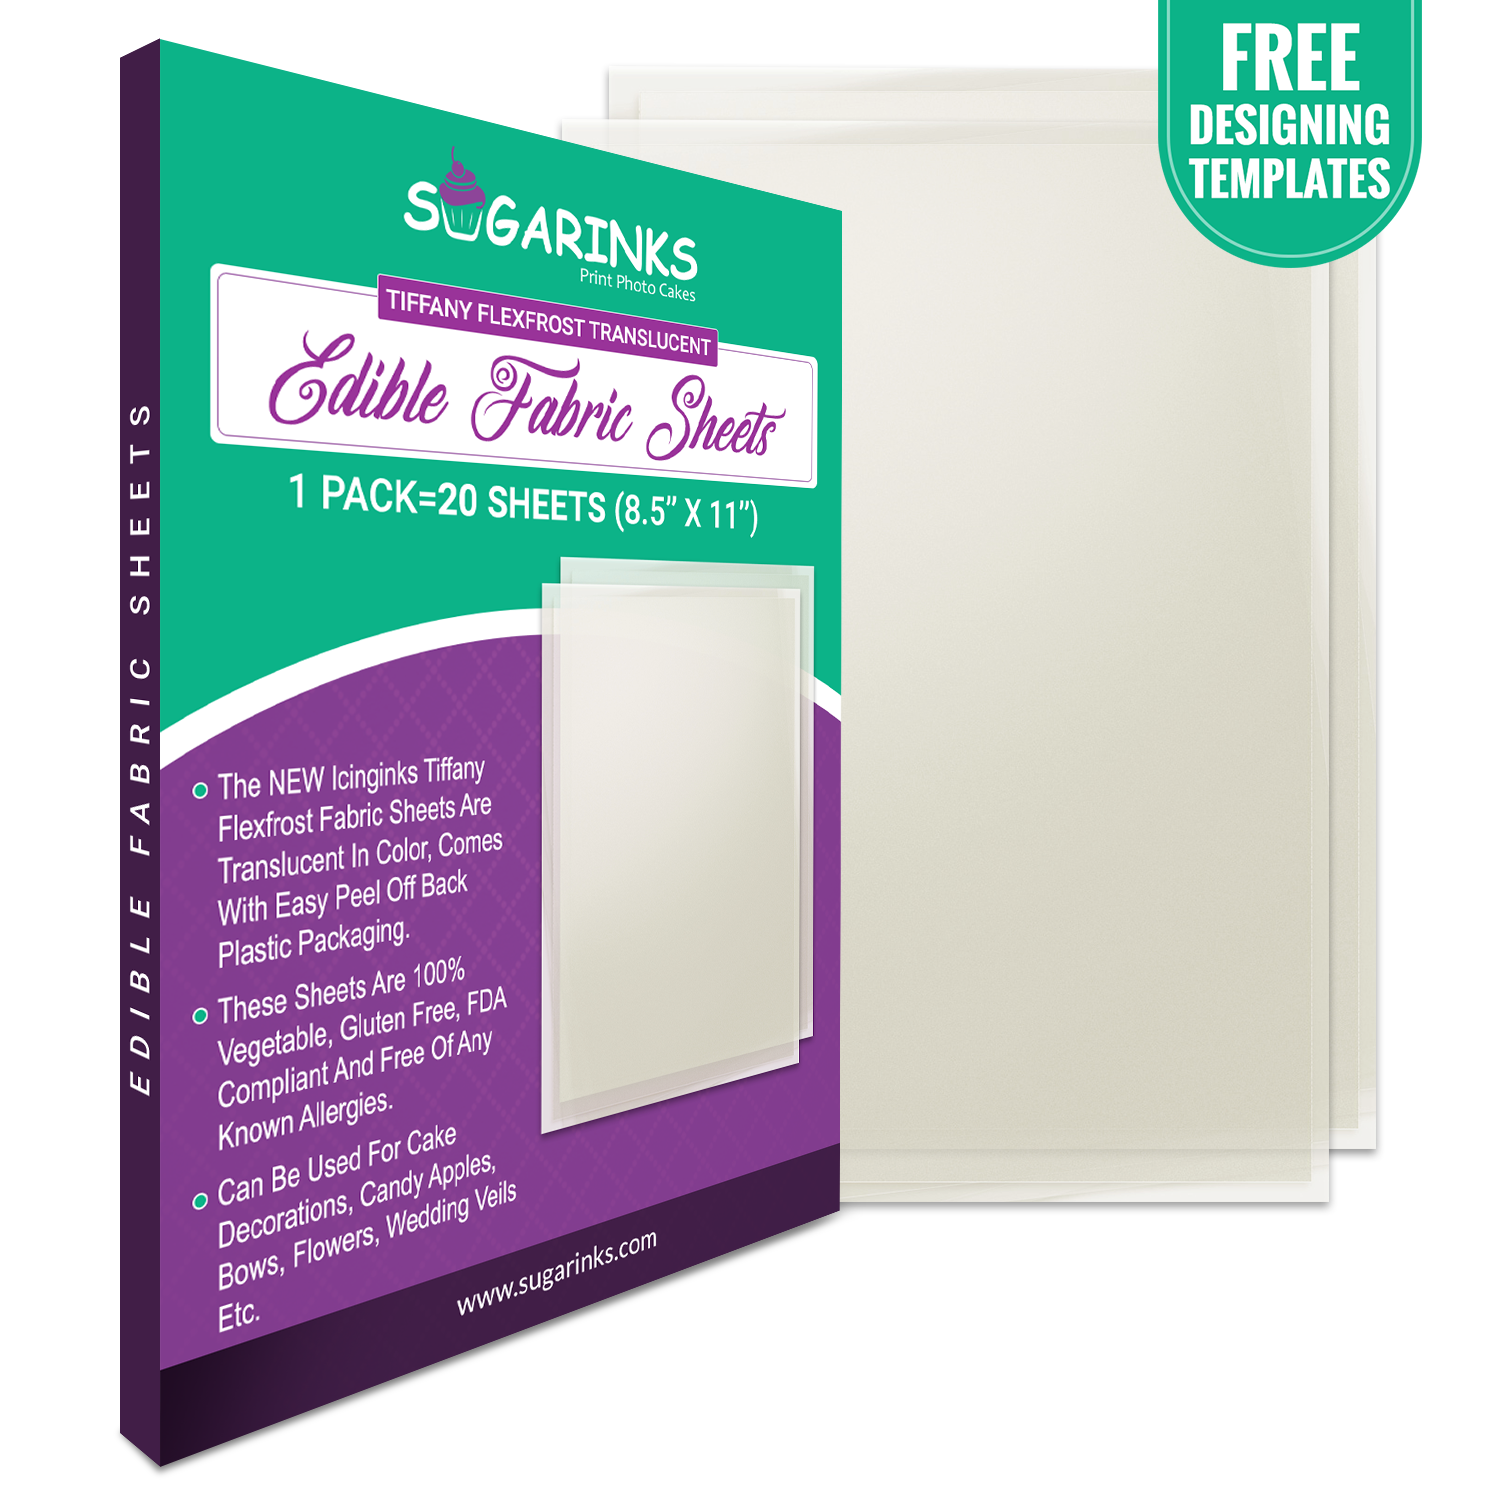 Sugarinks Premium Quality Tiffany Flexfrost Translucent Edible Fabric Sheets A4 Size (8.5”X11”) Pack of 20